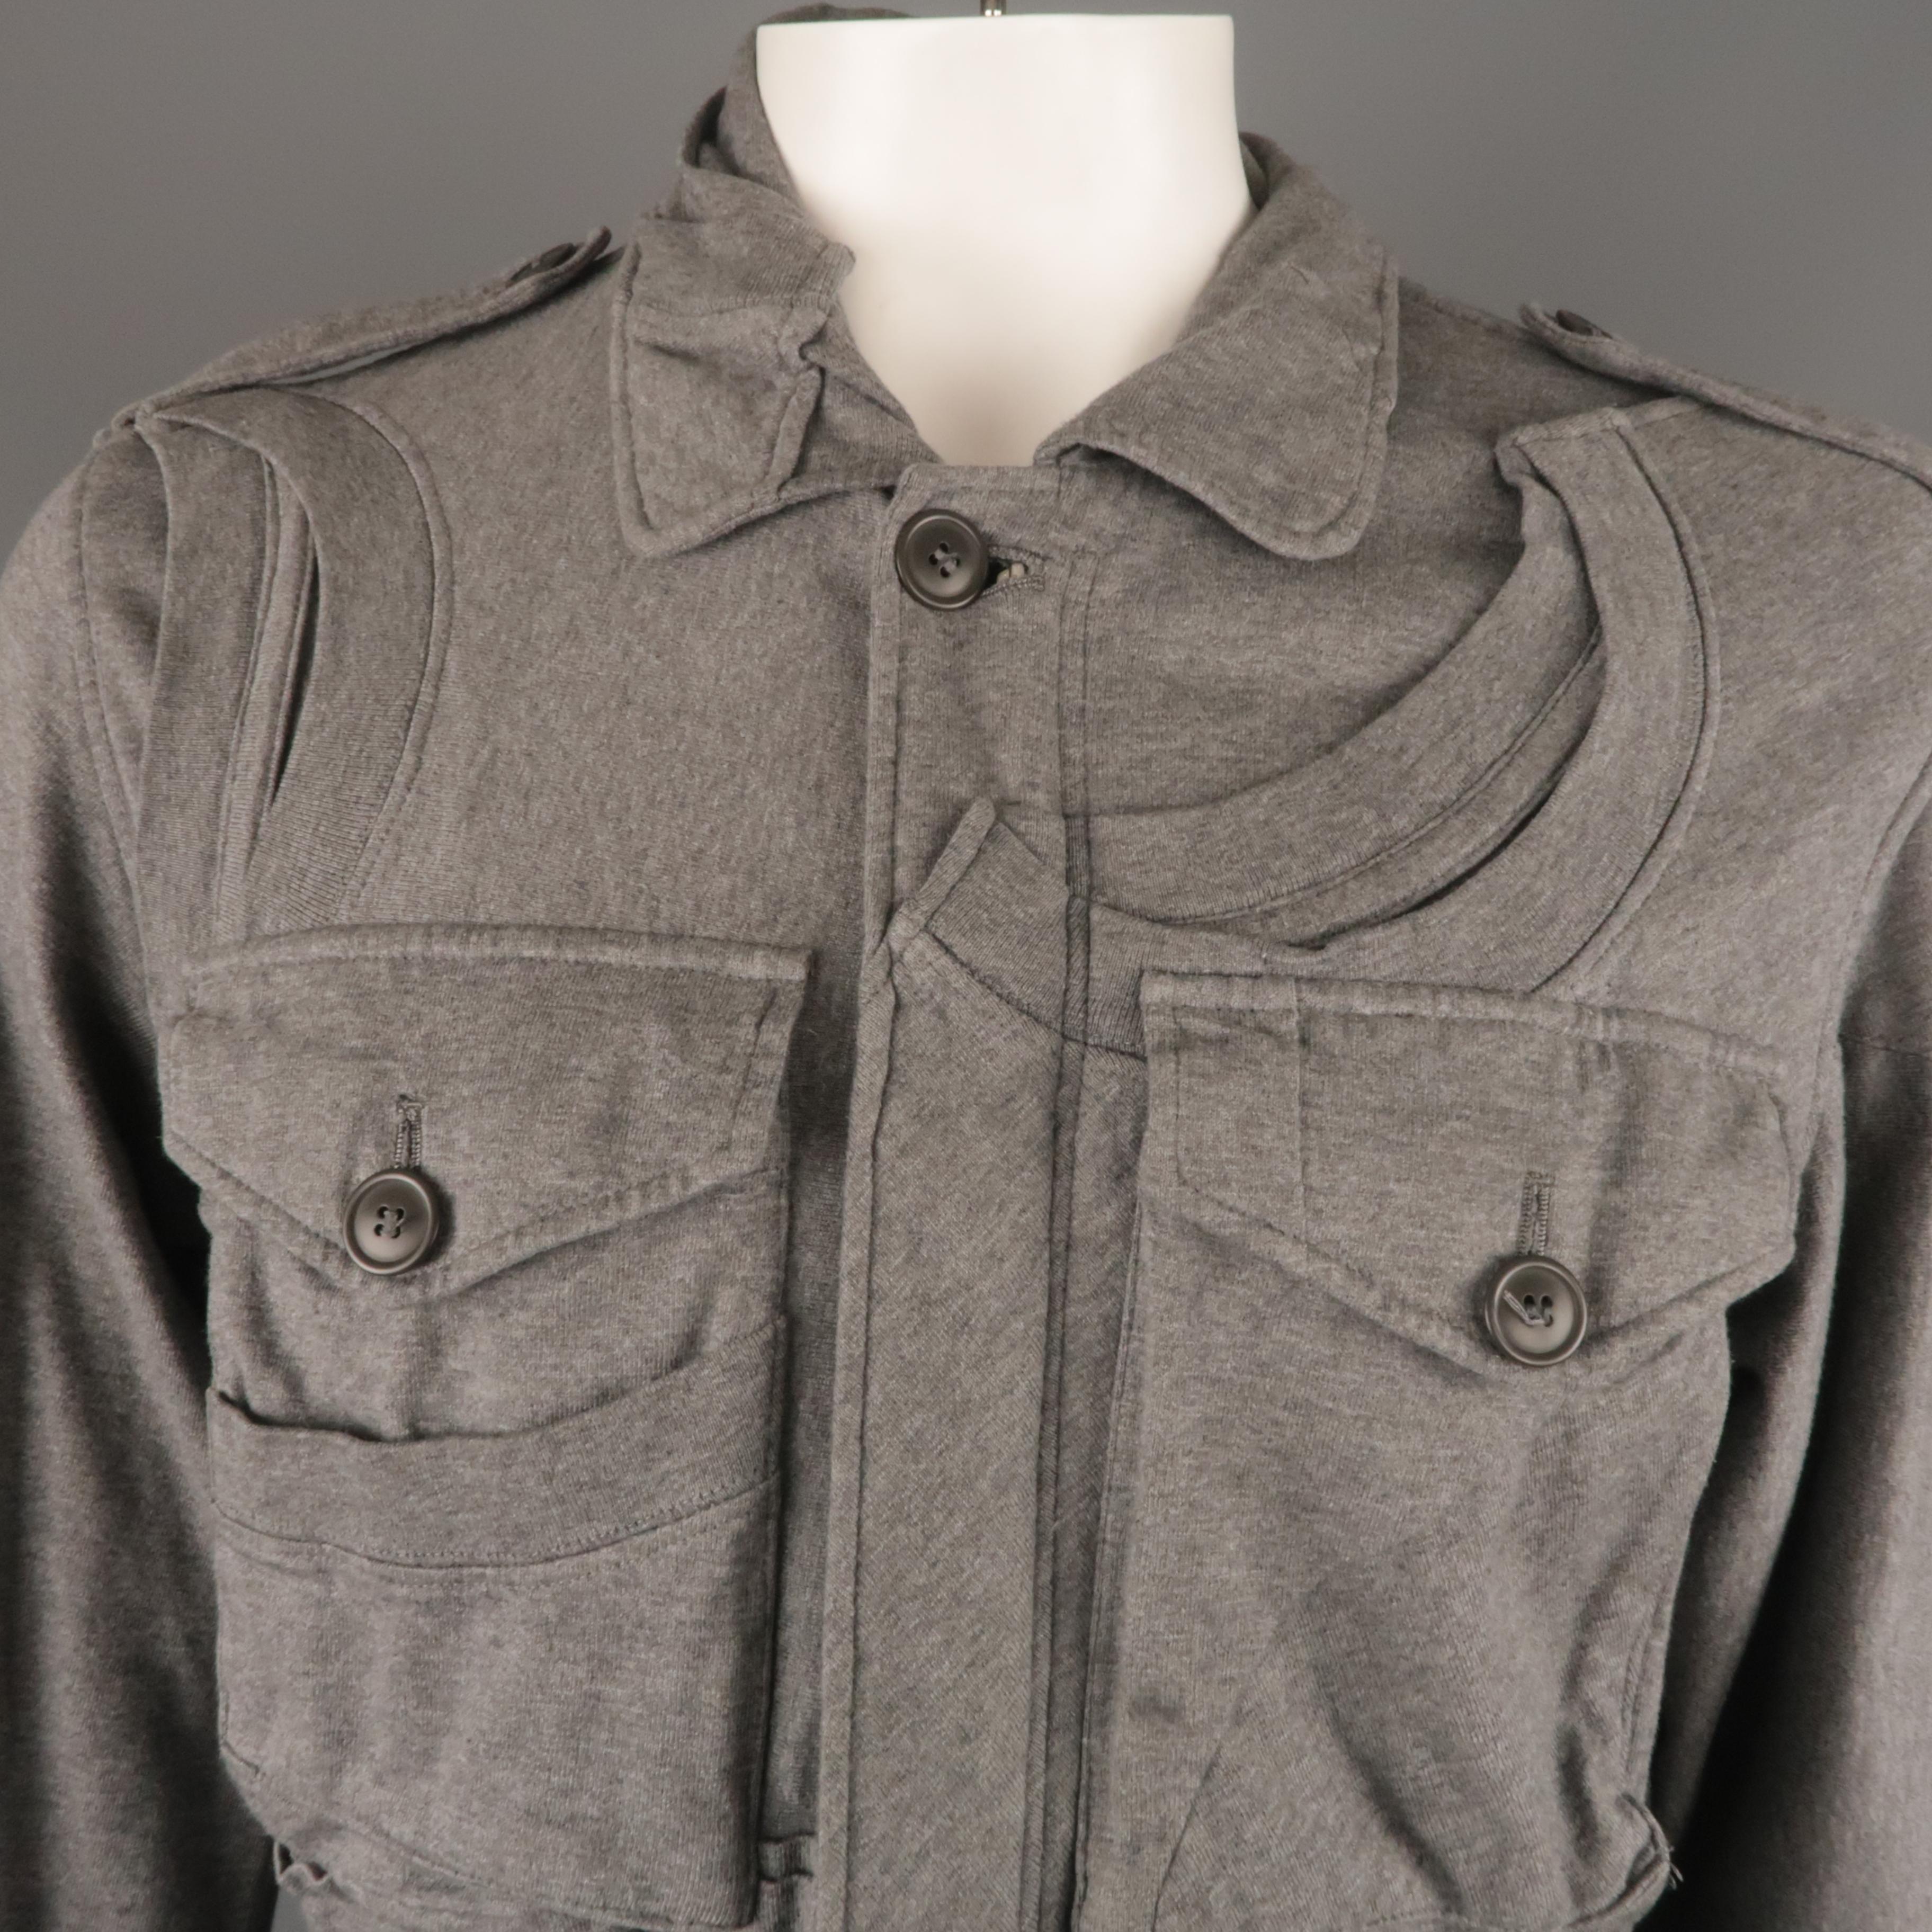 UNDERCOVER jacket comes in a gray cotton featuring constructed t-shirt details, waist drawstring, and patch pockets. Made in Japan.
 
Excellent Pre-Owned Condition.
Marked: JP 3
 
Measurements:
 
Shoulder: 19 in.
Chest: 43 in.
Sleeve: 27.5